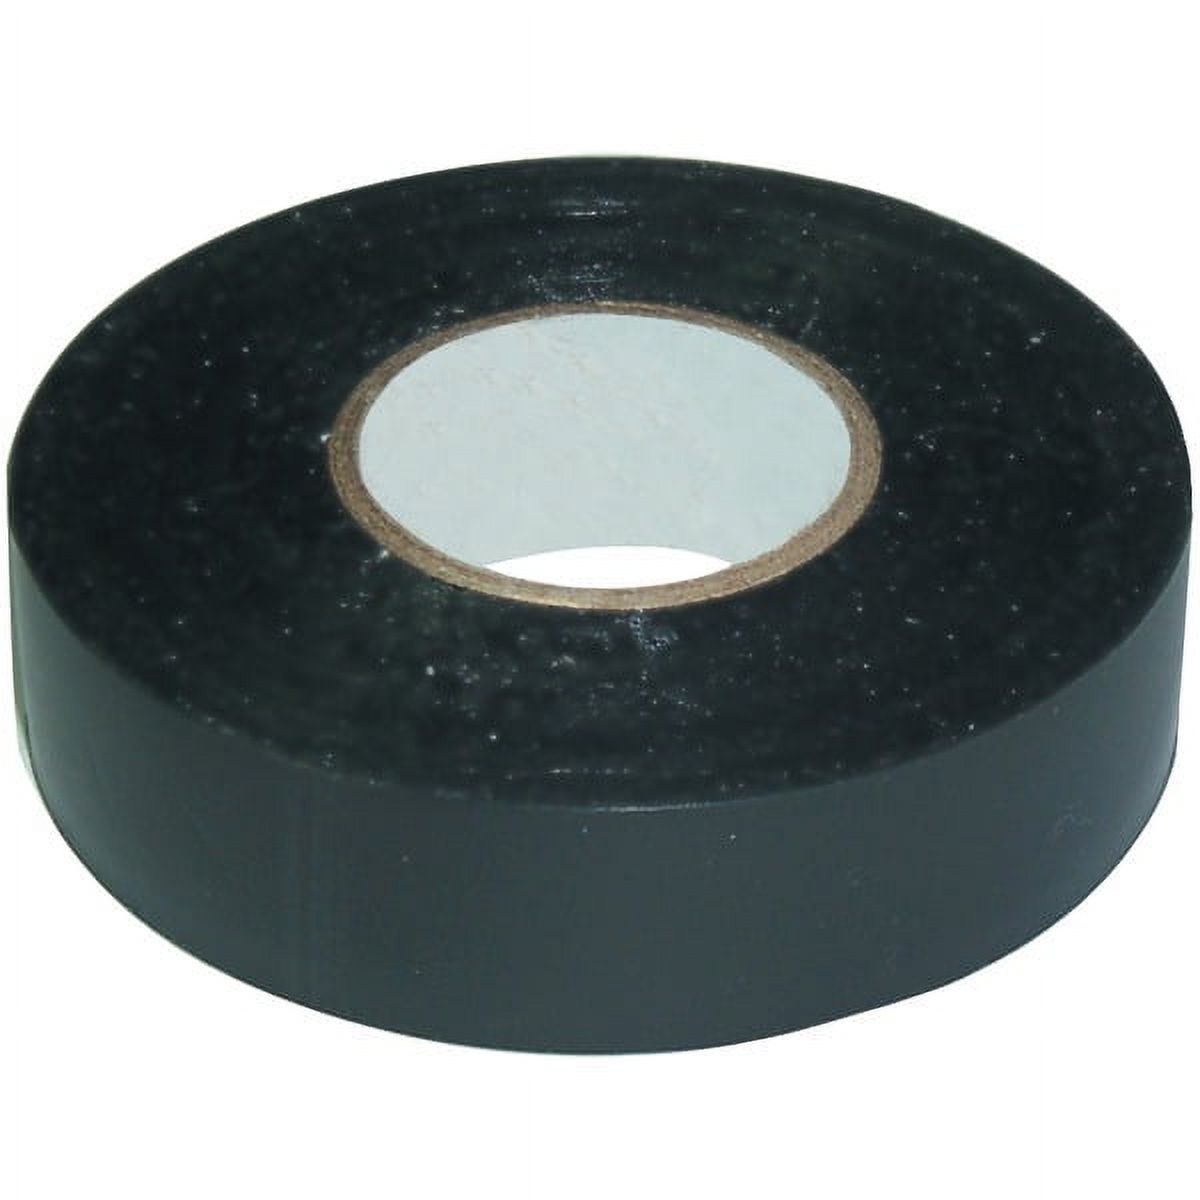 ELECTRICL TAPE 3/4X60' - image 1 of 2